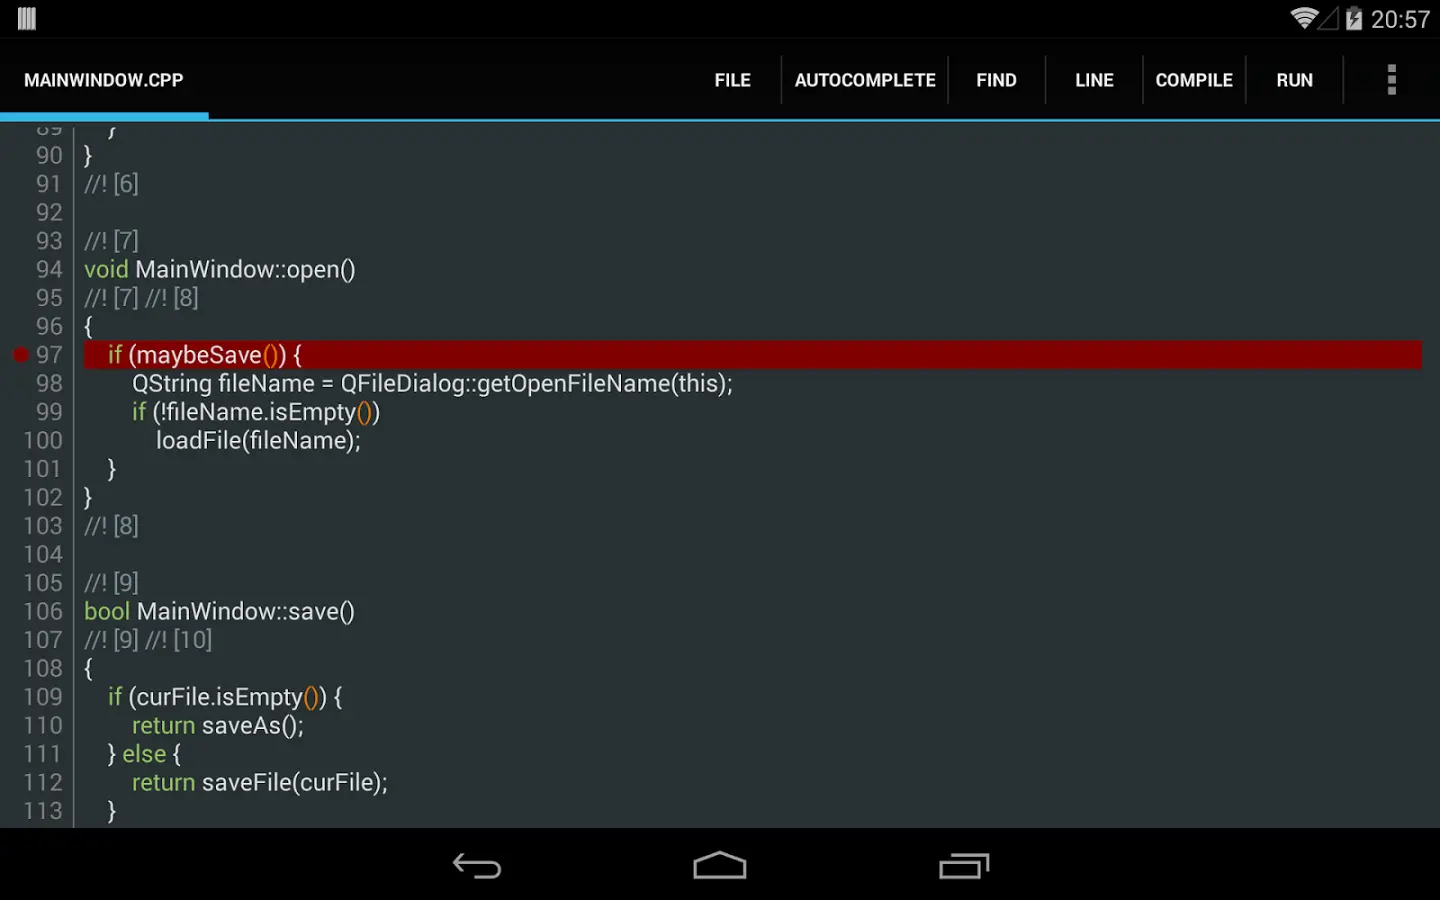 C/C++ Compiler (gcc) for Android - Run C/C++ programs on Android